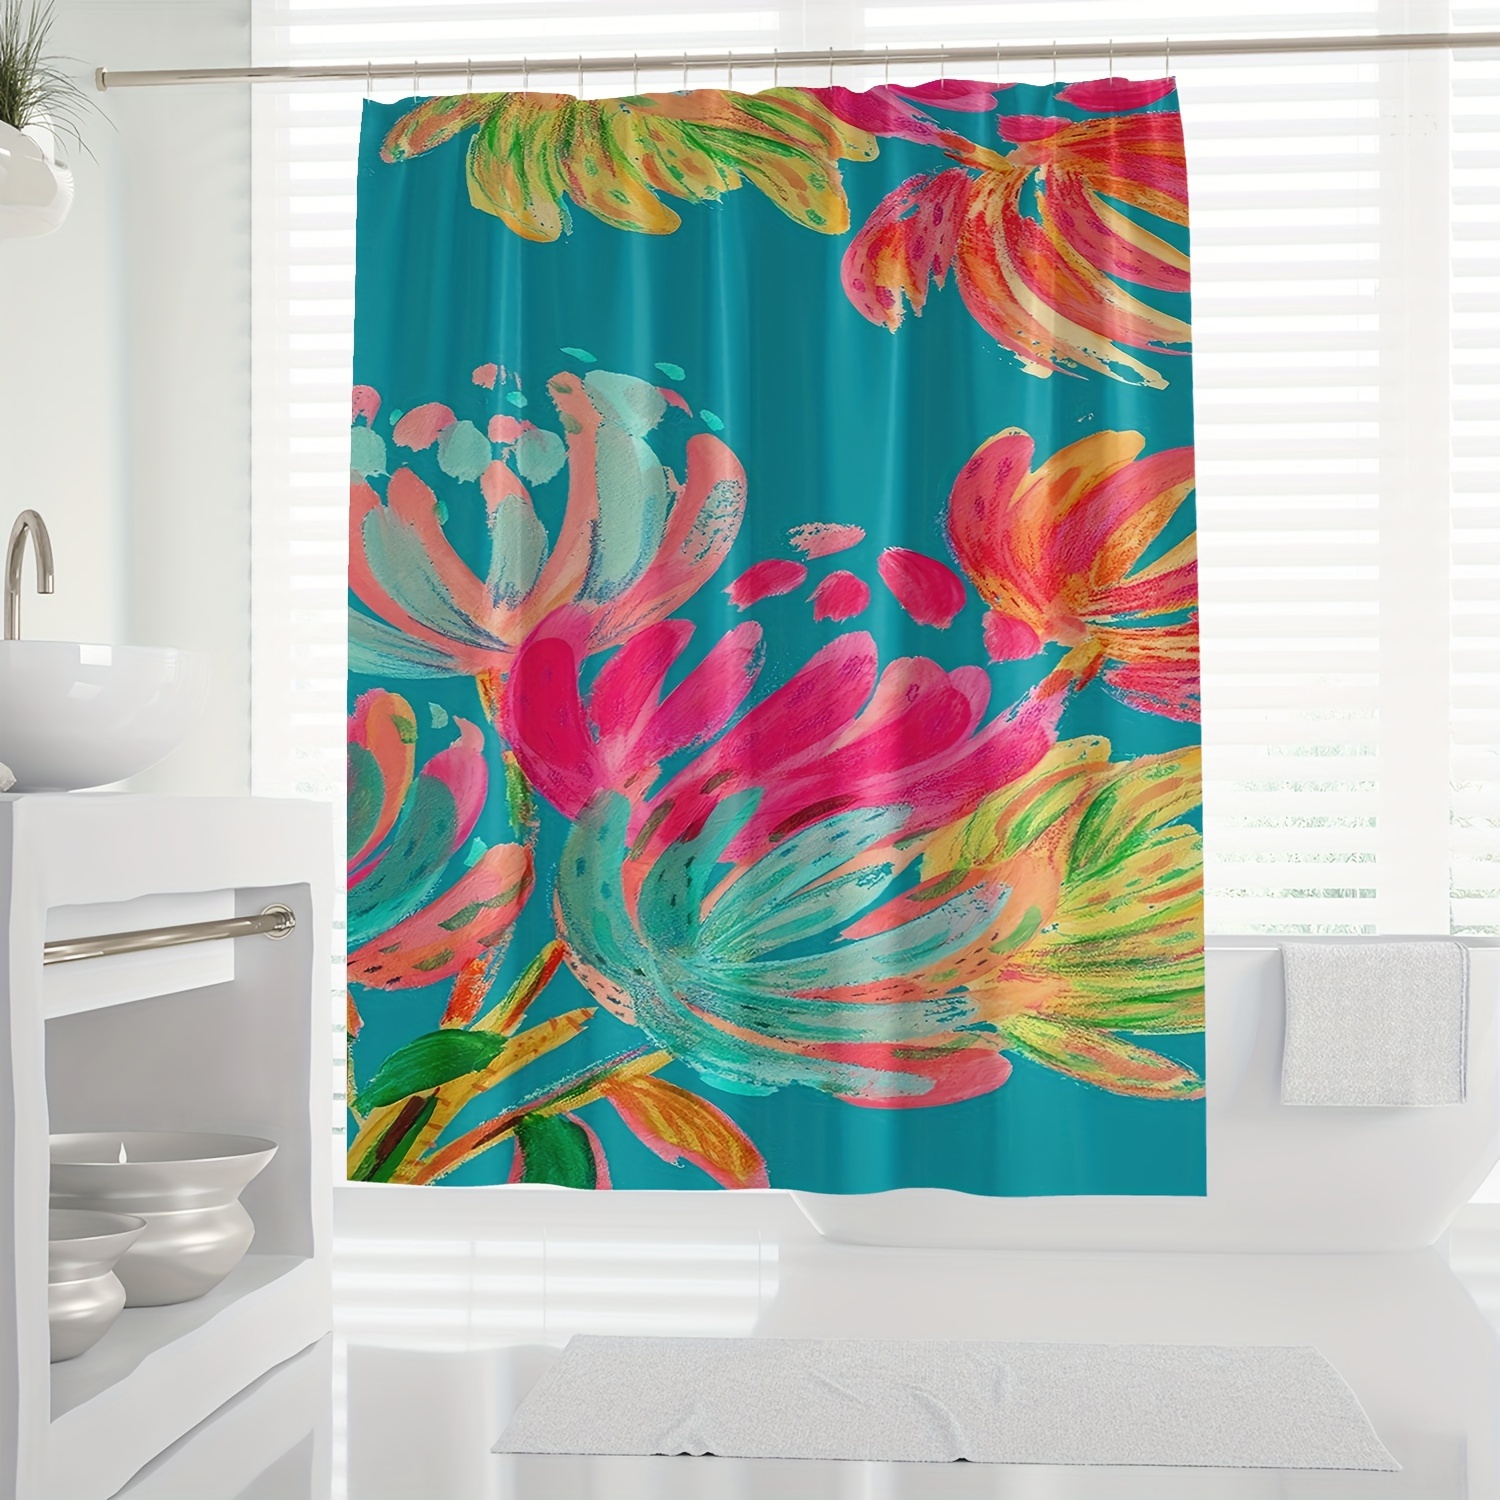 

Polyester Shower Curtain With Vibrant Colorful Wildflower Digital Print - Wrinkle-free, Machine Washable, Hook Included, Knit Weave, All-season, Cross Hatch Pattern, Arts Theme - 1pc